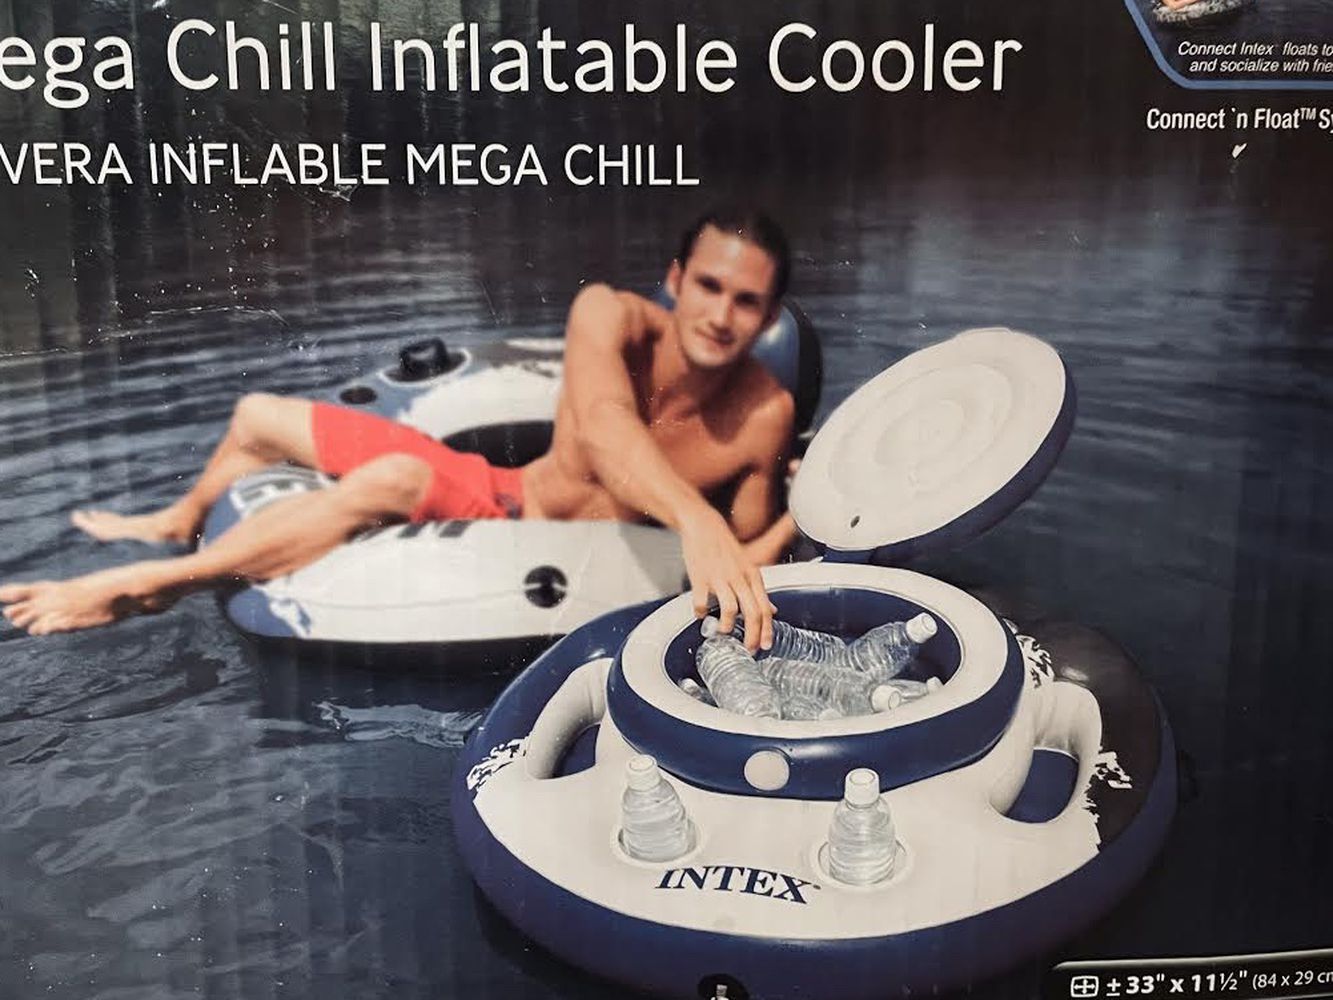 Intex Mega Chill Inflatable Cooler NEW In Box PRICE IS FIRM!